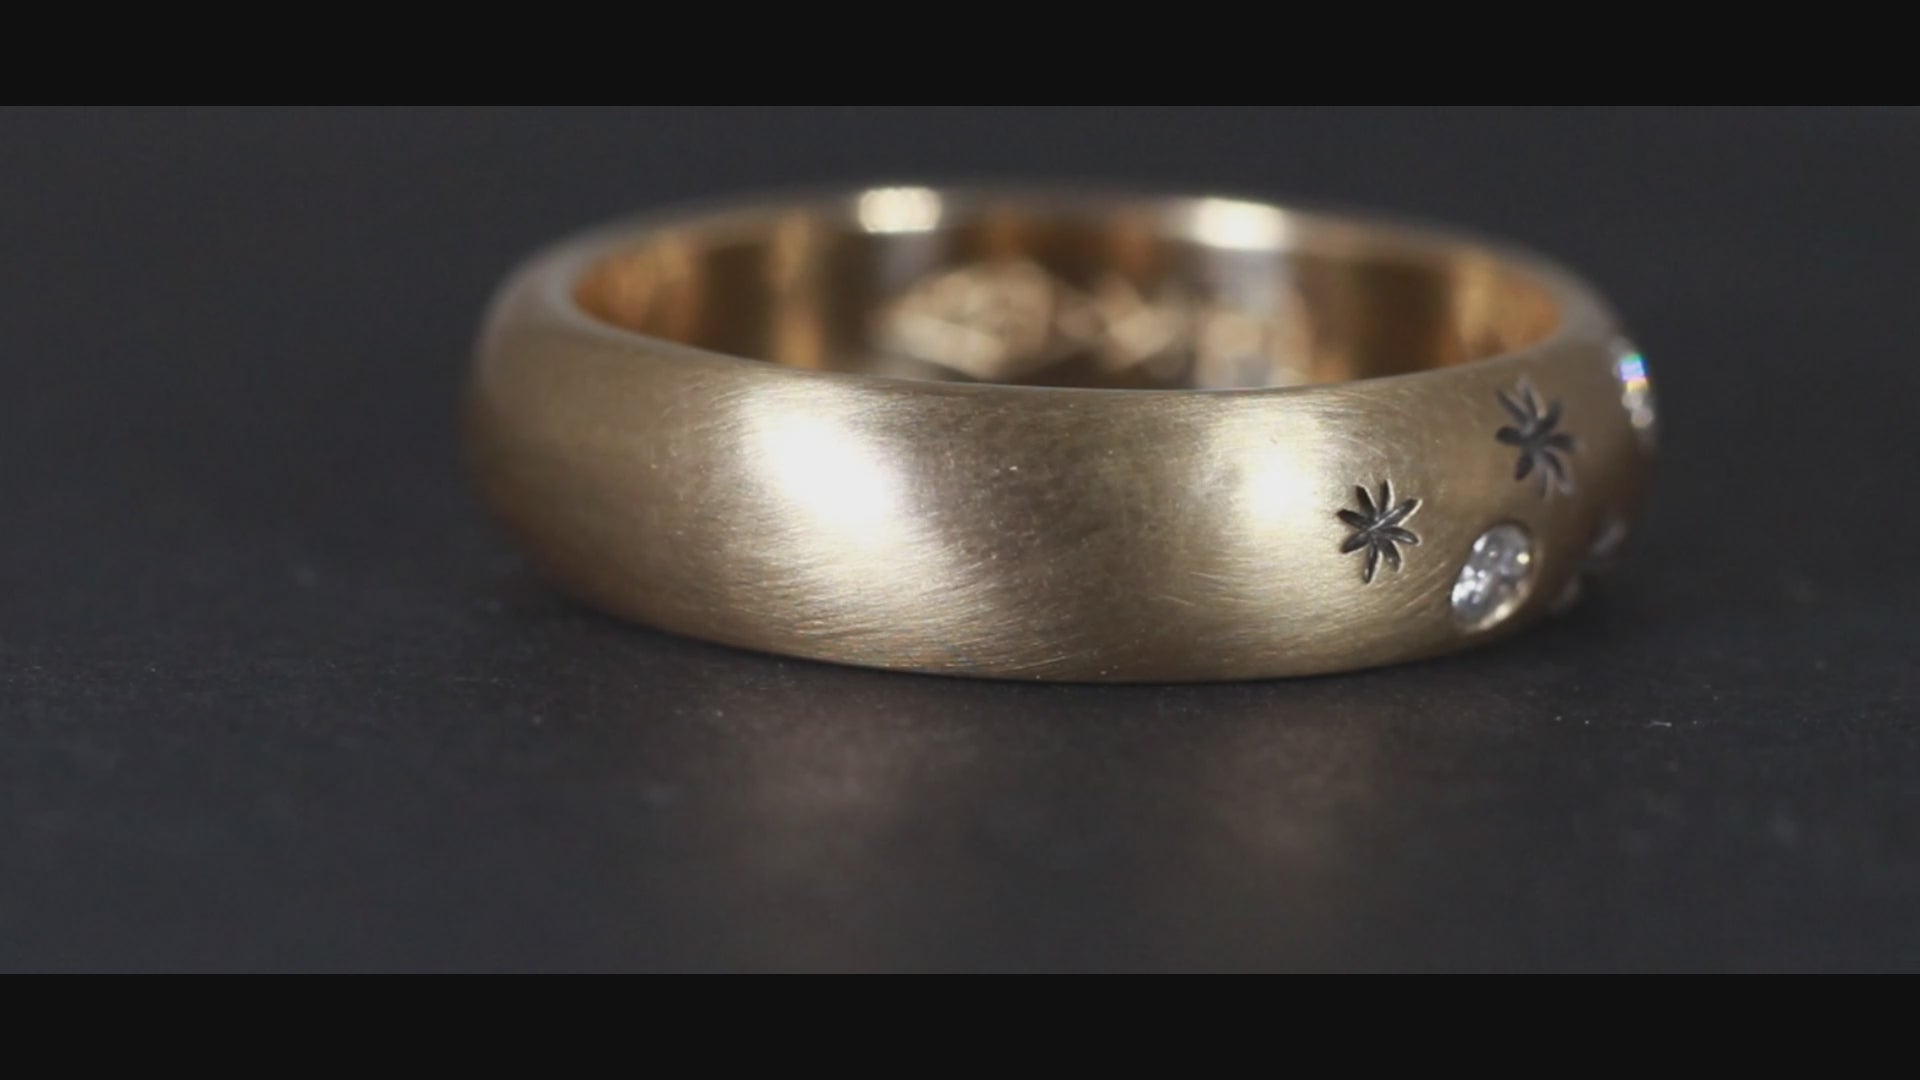 A rounded yellow gold ring band with hand carved, black stars sprinkled between 3 bright white full cut diamonds that are flush set into the gold.